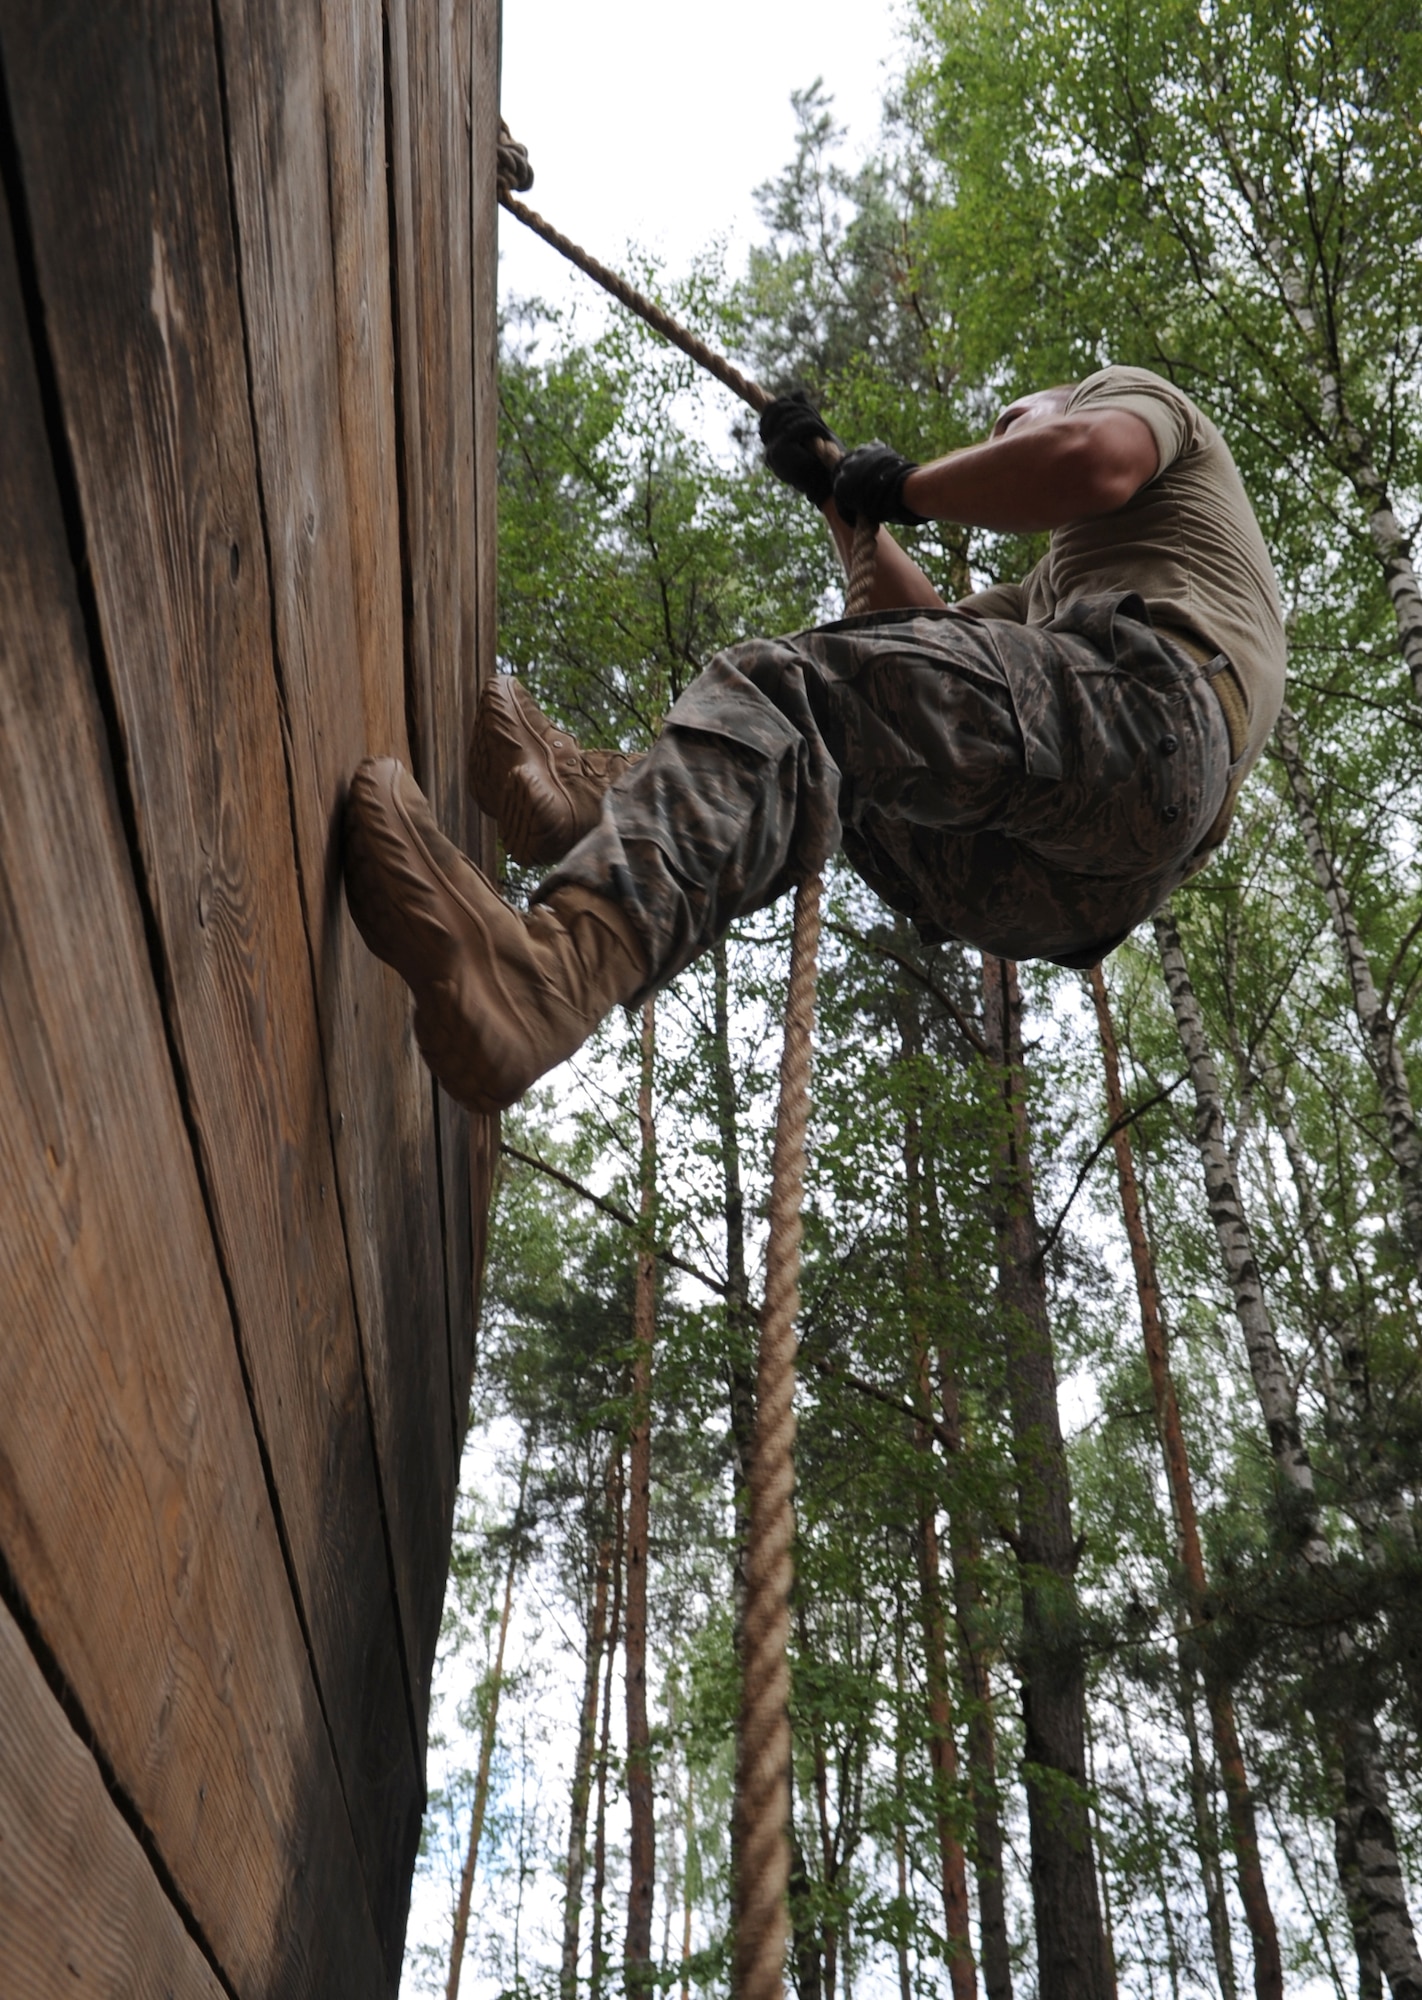 U.S. Air Force Staff Sgt. Till Schanz, 4th Air Support Operations Squadron power productions, Sullivan Barracks, Mannheim, Germany, attempts to complete an obstacle during exercise Allied Strike 10, Grafenwoehr, Germany, July 23, 2010. Allied Strike is Europe's premier close air support (CAS) exercise, held annually to conduct robust, realistic CAS training that helps build partnership capacity among allied North Atlantic Treaty Organization nations and joint services while refining the latest operational CAS tactics. For more ALLIED STRIKE information go to www.usafe.af.mil/alliedstrike.asp. (U.S. Air Force photo by Senior Airman Caleb Pierce)